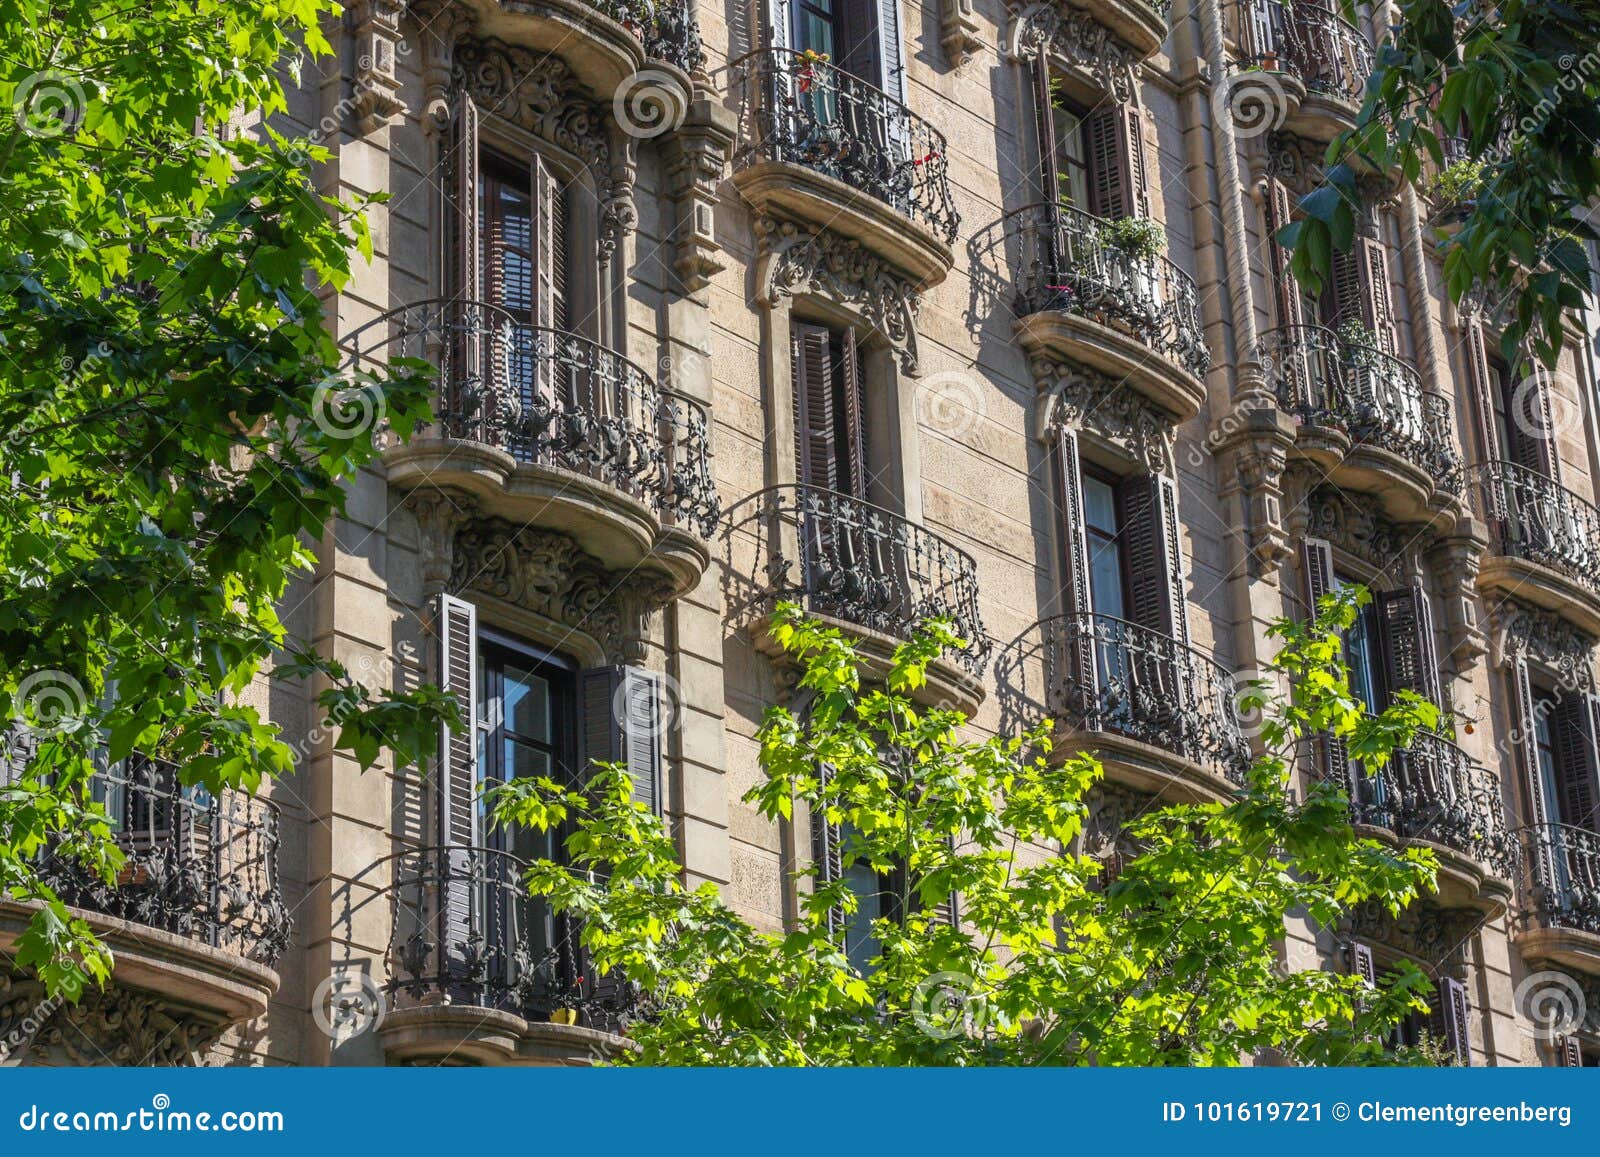 apartments with wrought iron balconies in eixample, barcelona, s